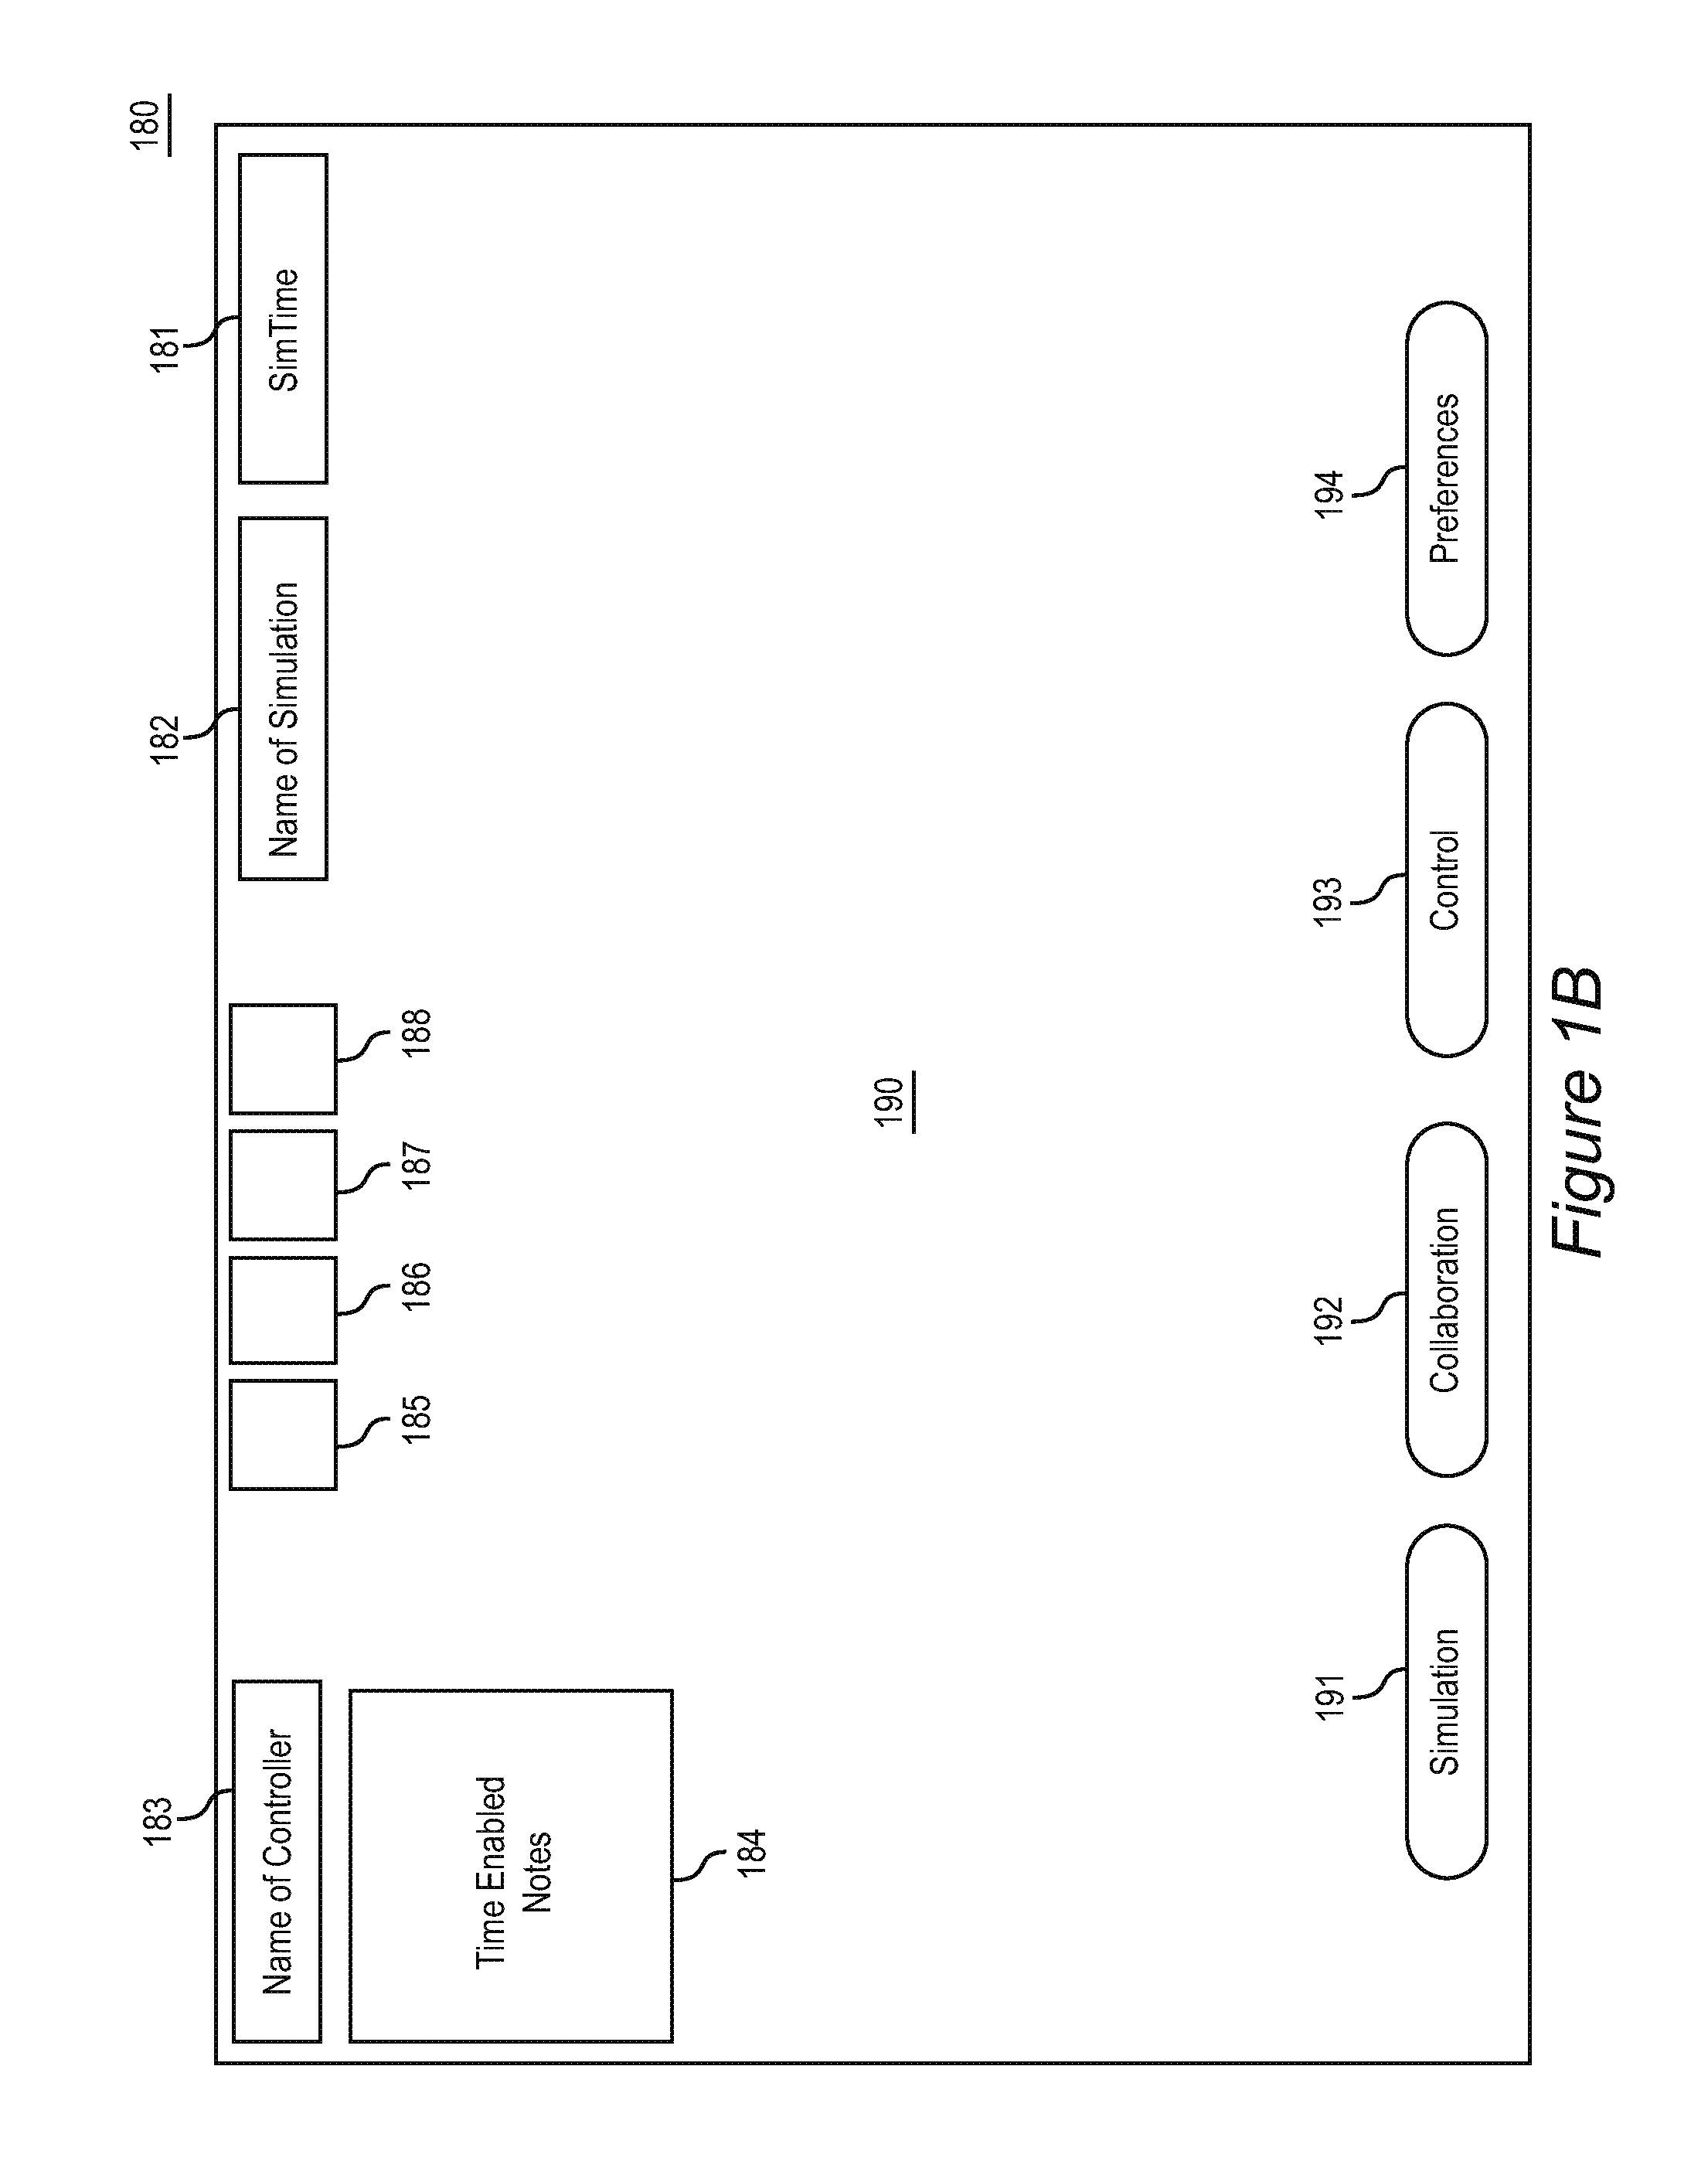 System and method for collaborative viewing of a four dimensional model requiring decision by the collaborators